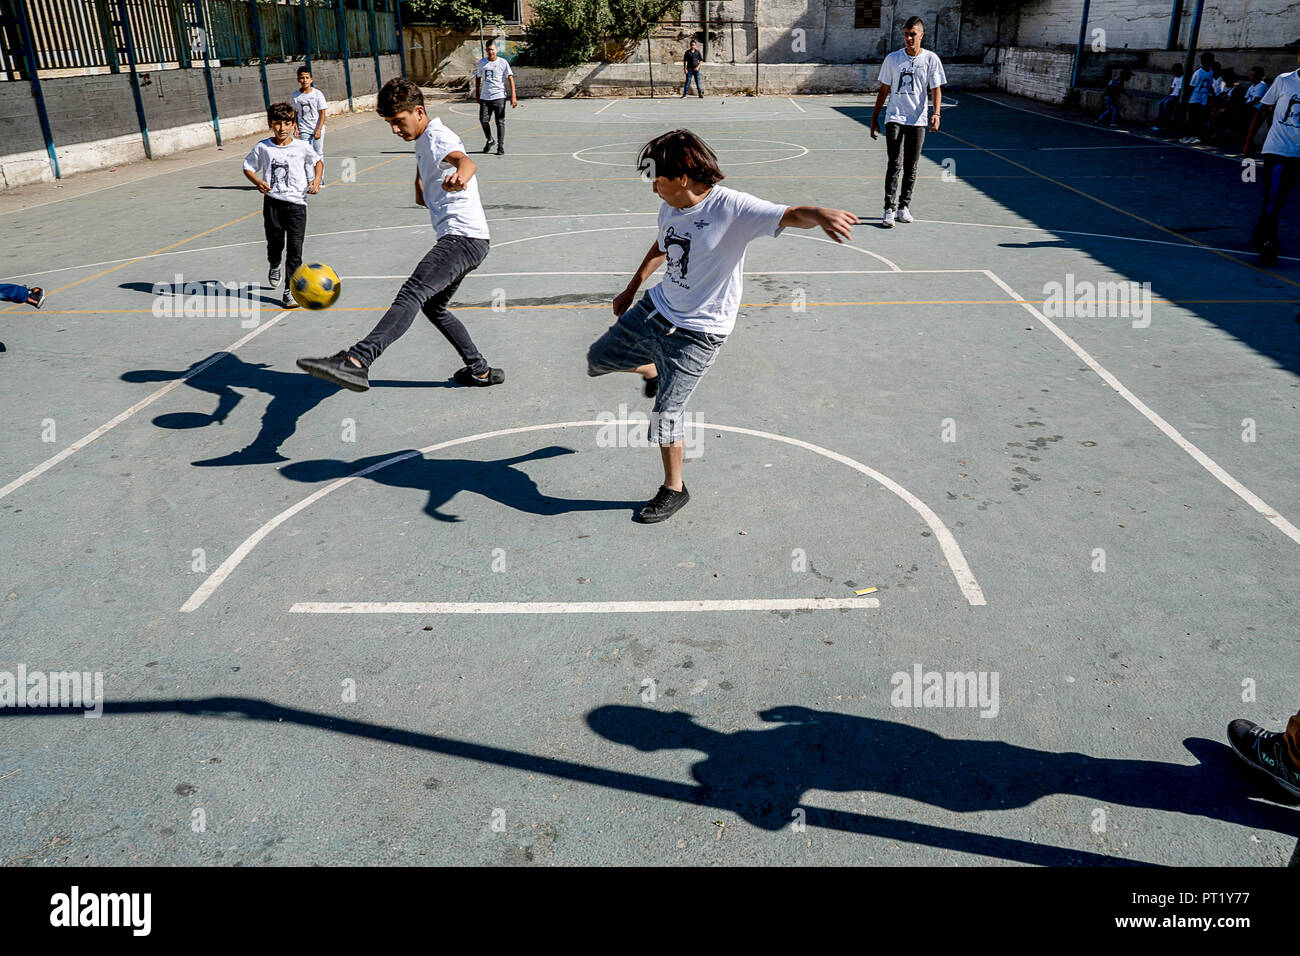 Bethlehem, Palestine. 13th Feb, 2018. Students are seen playing football in the courtyard during the summer camp.The Return Summer Camp was organised for children of the Aida refugee camp, it was established in 1950 by the Palestinians who were expelled from their homes from 27 towns throughout Palestine, namely Nasra, Tabaria, Jerusalem, Acre, Jaffa, Haifa and Hebron. This is a 4th generation of refugees, 130 children ranging from 4 to 16 years of age being overlooked by 20 instructors and volunteers and it was funded by the UN until 2000. (Credit Image: © Enzo Tomasiello/SOPA Images vi Stock Photo